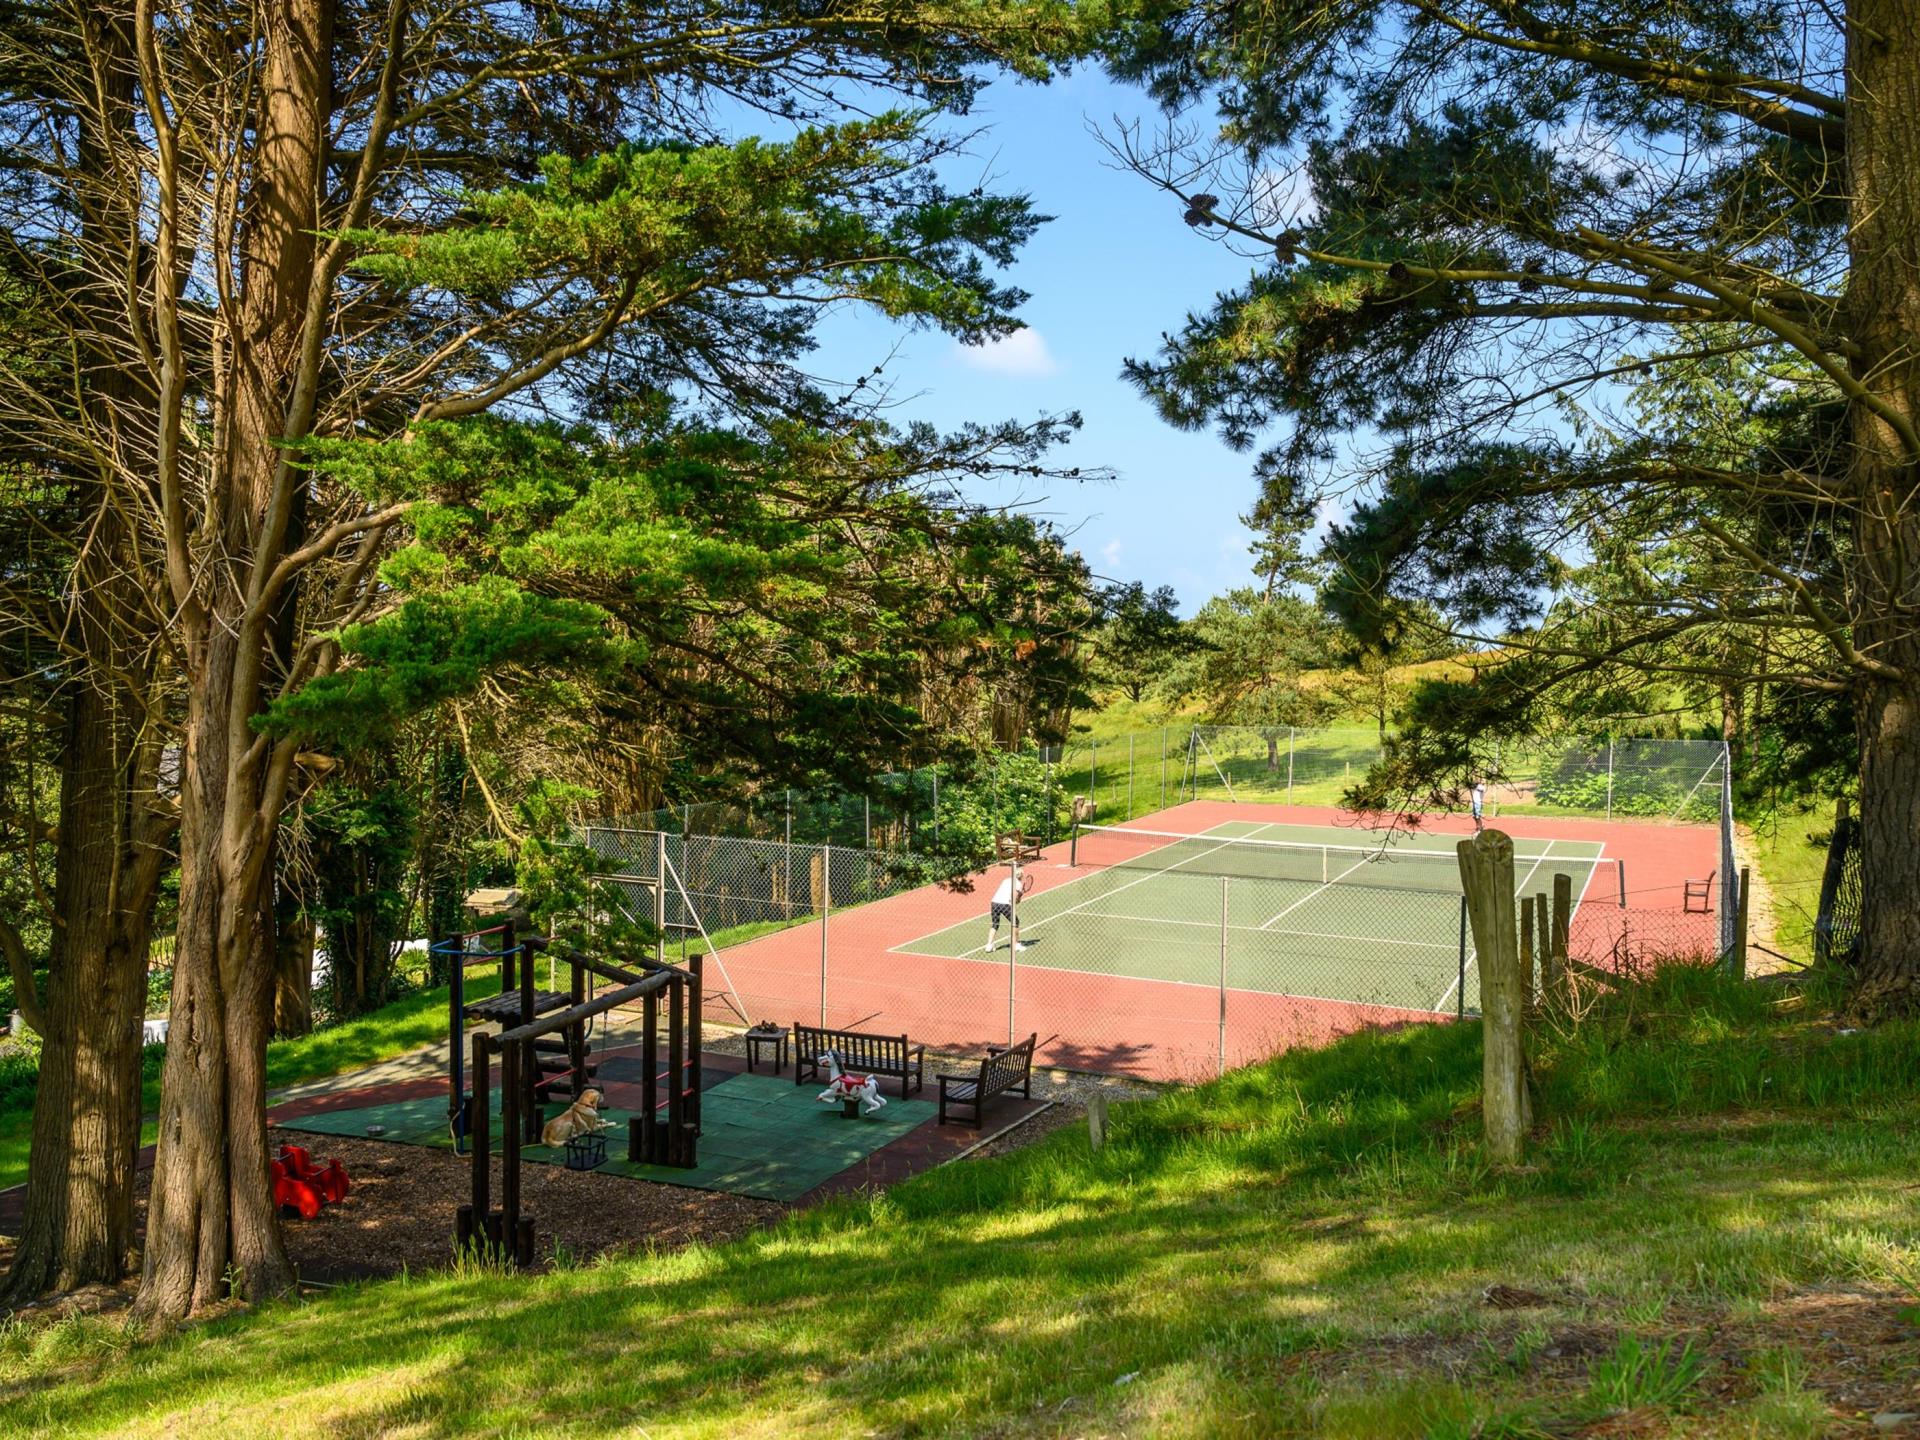 Hotel tennis court and play area